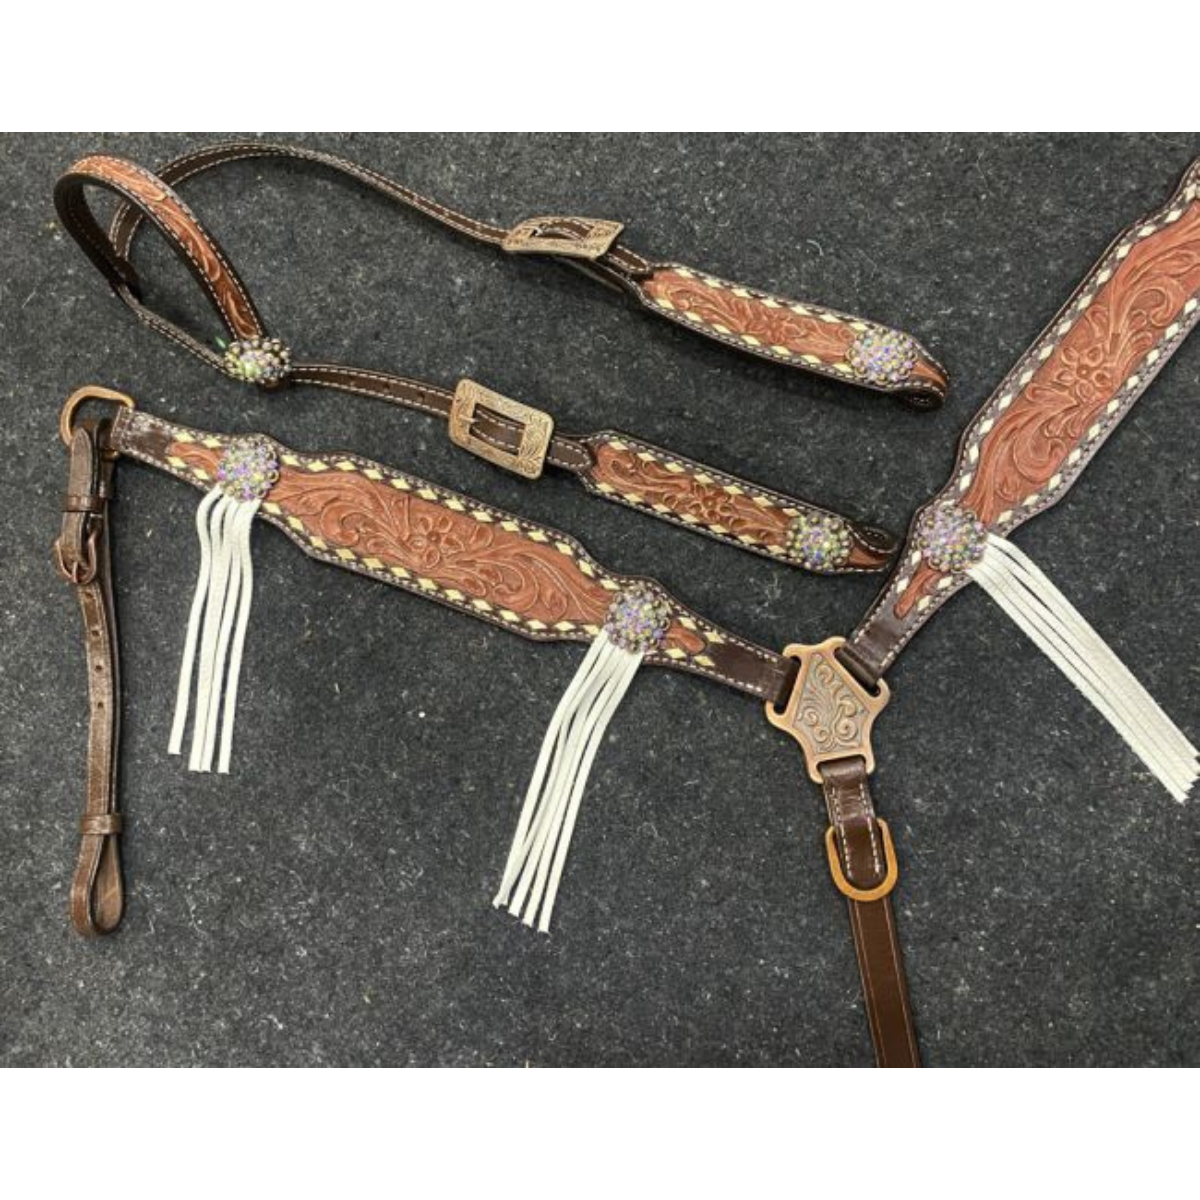 Showman ® Two-Tone Tooled Single Ear Headstall and Breast Collar Set with rawhide lacing and fringe accents. - Double T Saddles